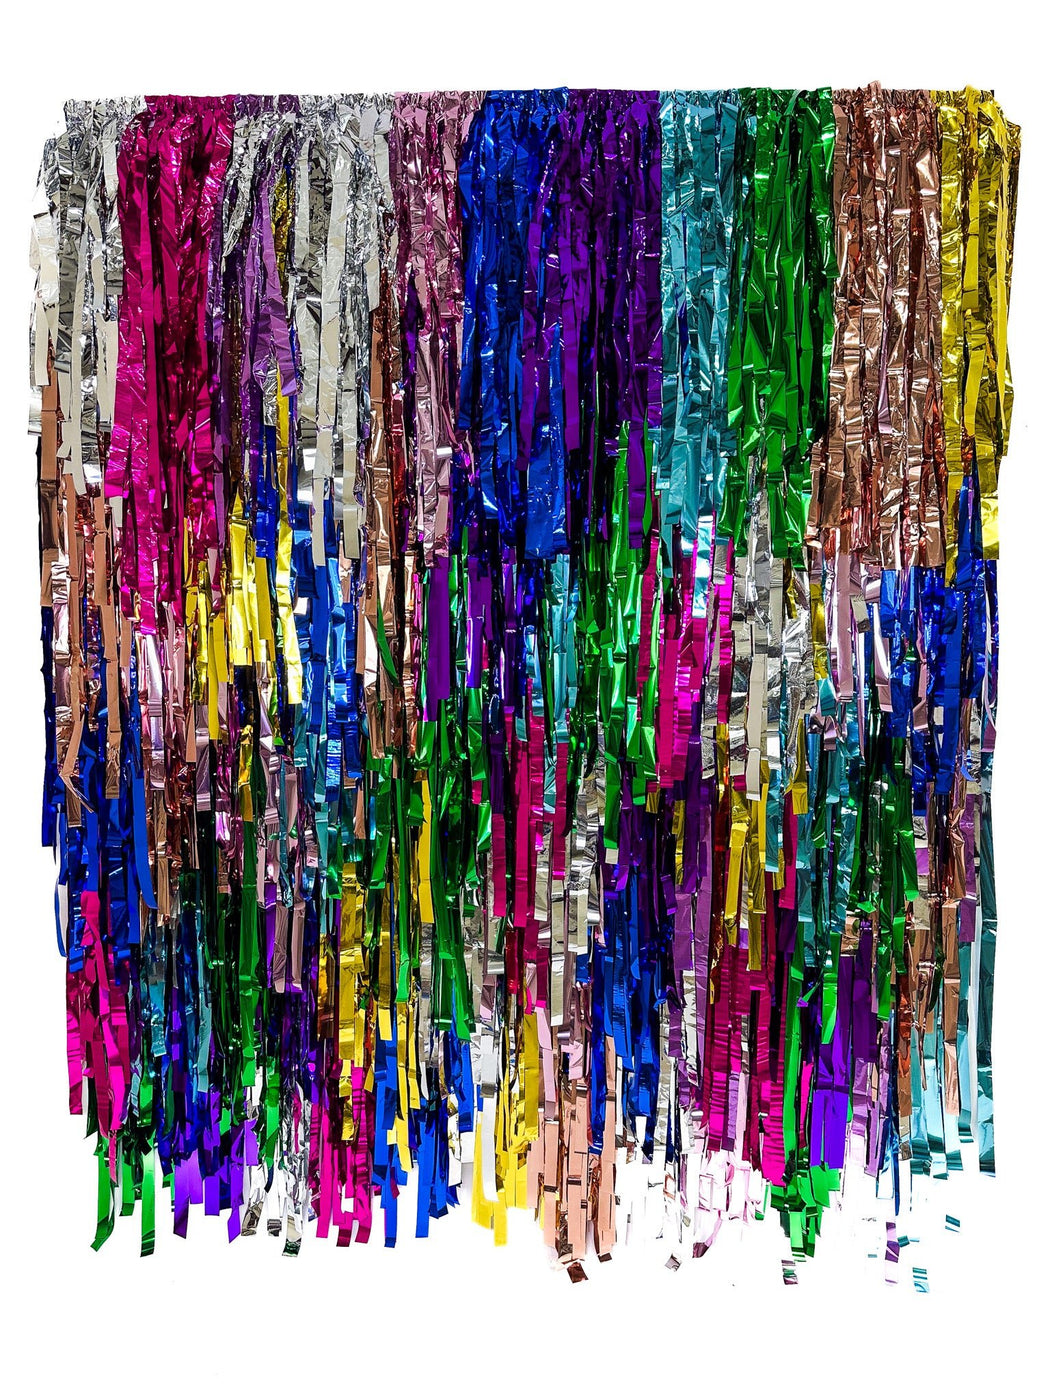 No Panic At This Disco Fringe Backdrop - Oh My Darling Party Co-1970's birthday80s partyall metallic backdrop #Fringe_Backdrop#